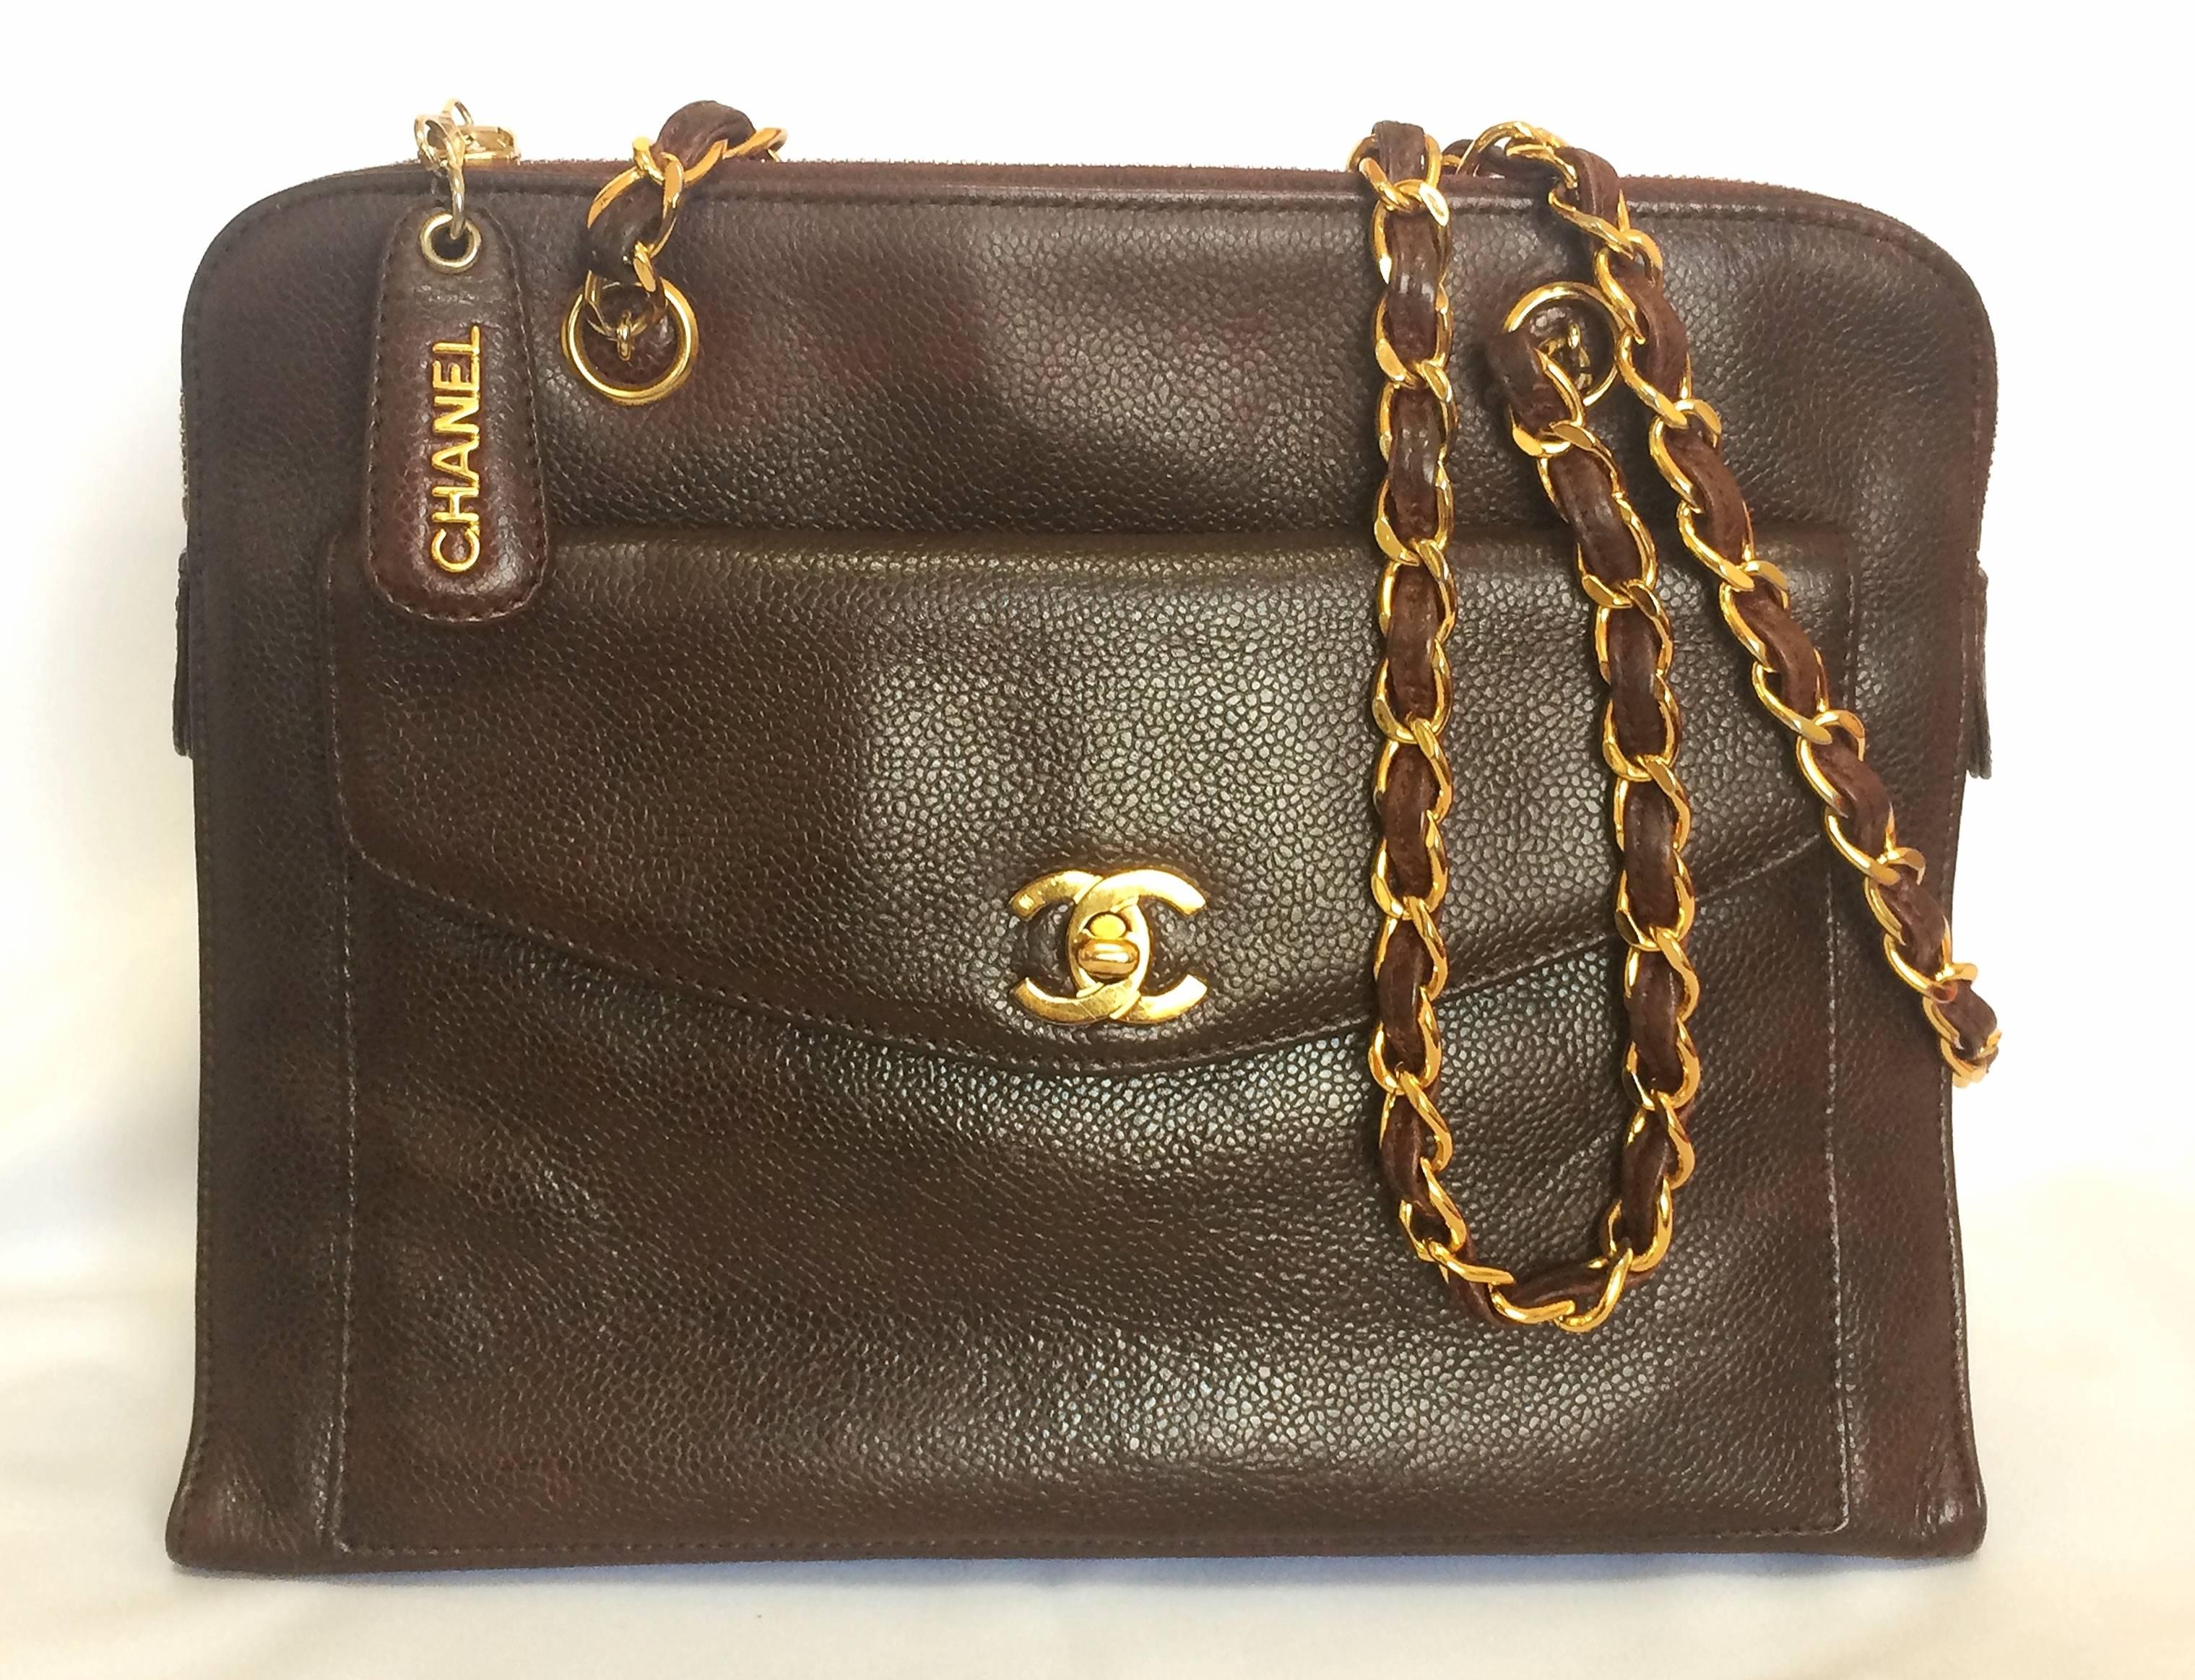 1990s. Vintage CHANEL dark brown caviar leather chain shoulder tote bag with golden CC closure. Classic and daily use bag

This is a vintage caviarskin chain shoulder tote bag in dark brown from 90's CHANEL. 
Featuring a golden CC turn lock